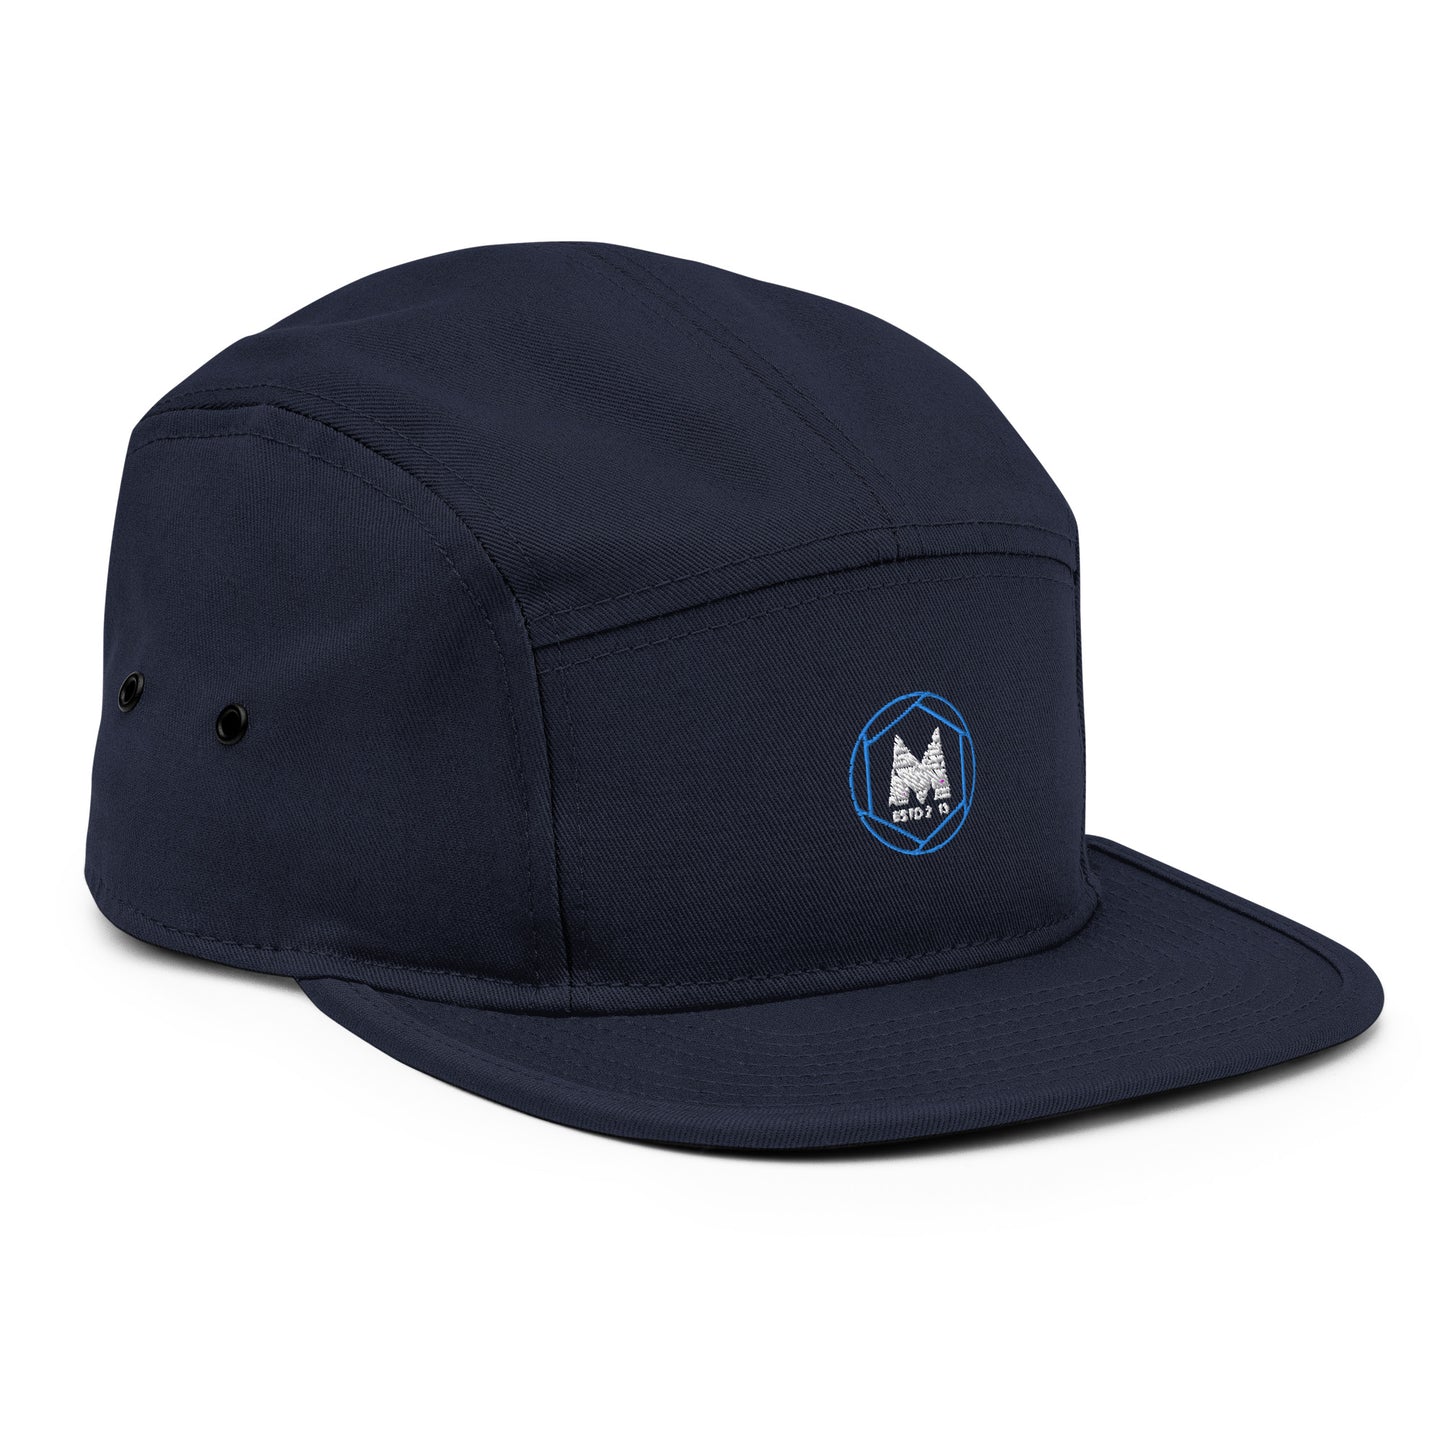 Marcy Unlimited Unisex 5 Panel Camper